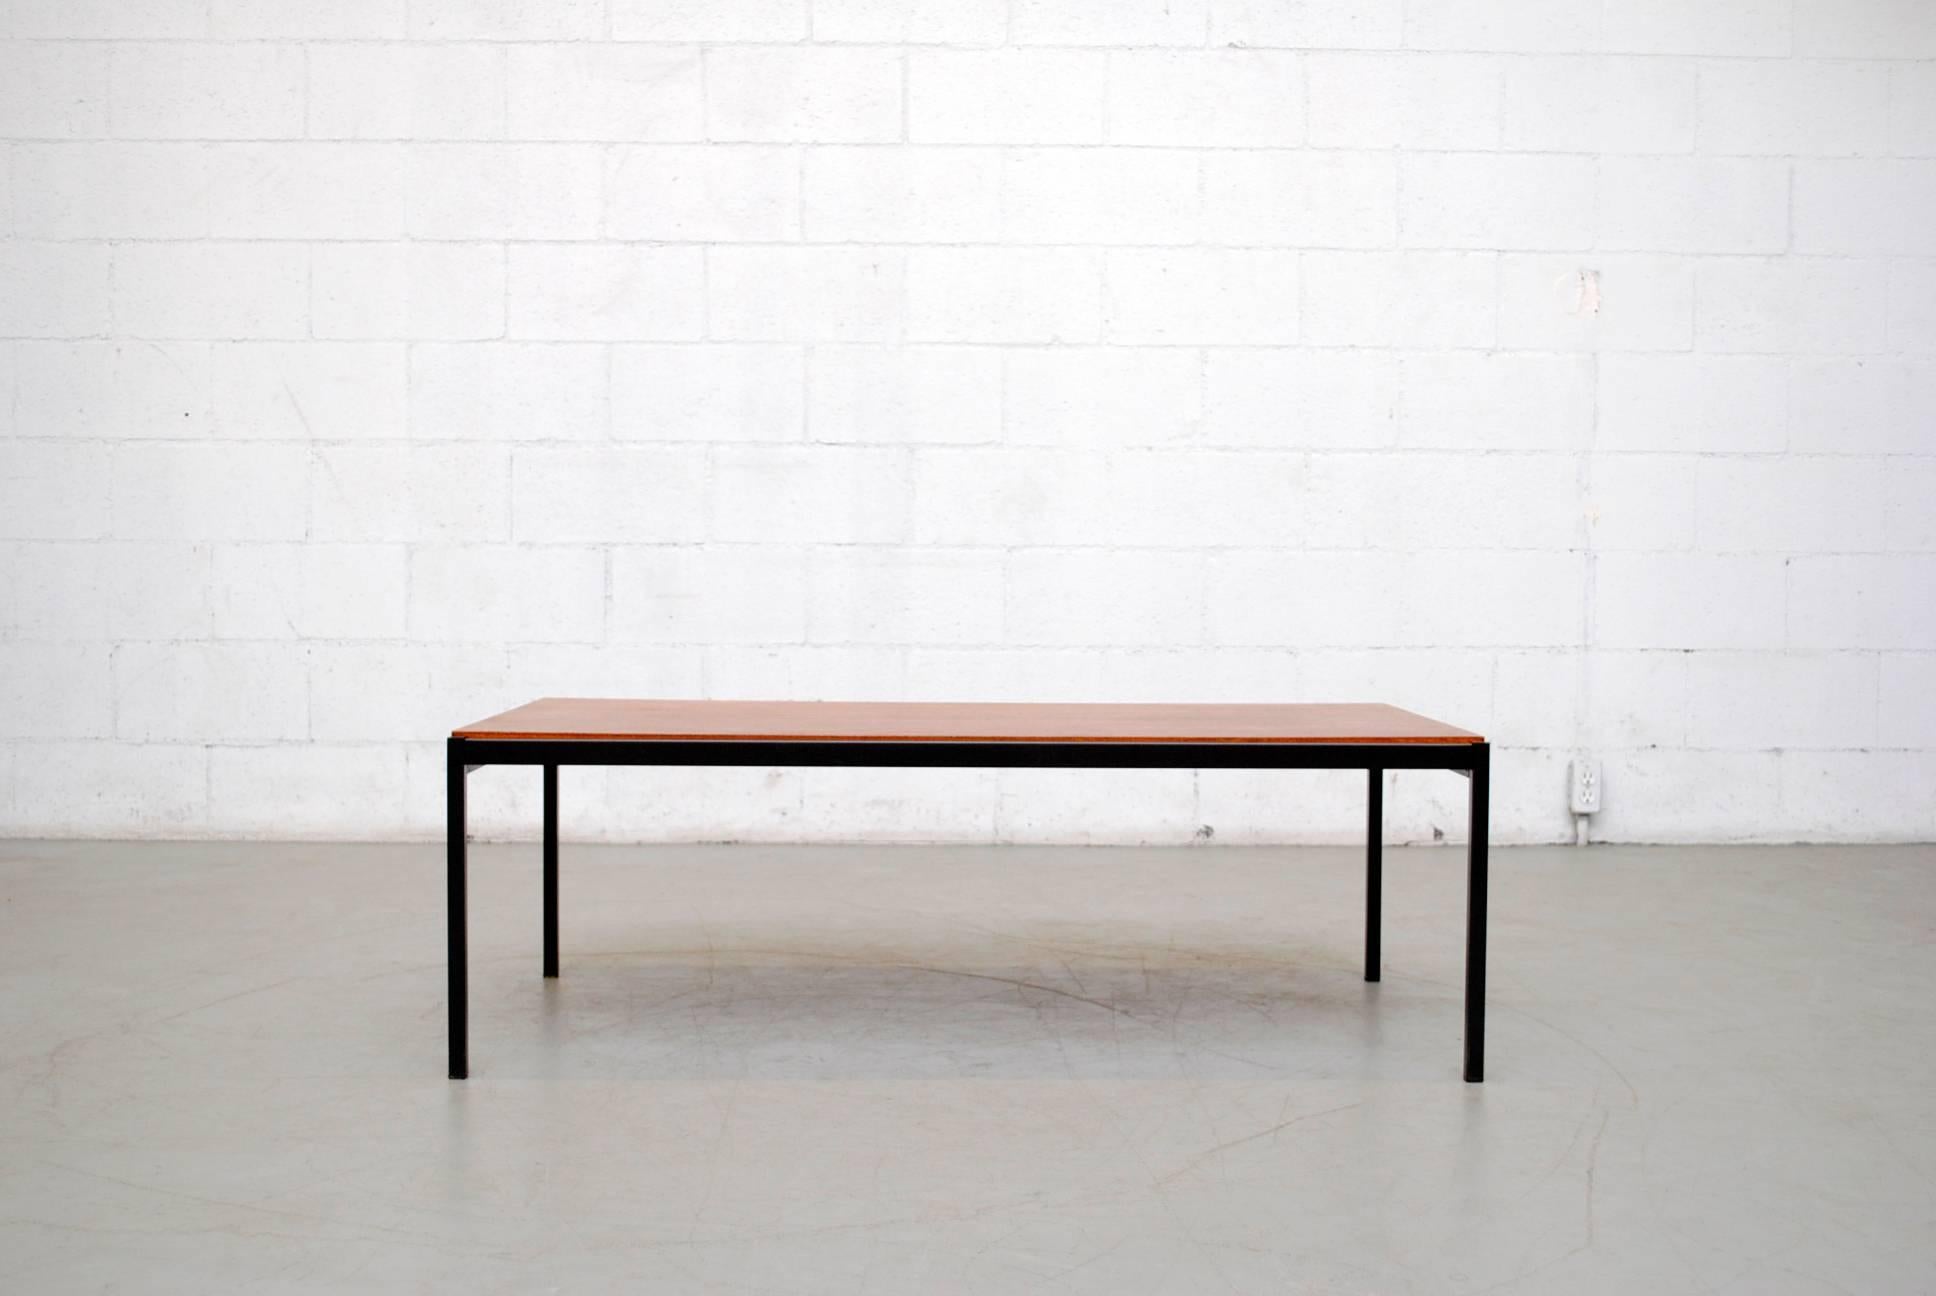 Handsome Architectural Coen de Vries teak and metal coffee table by Gispen with original top and black enameled metal frame. Visible wear, consistent to its age and usage. Well loved.